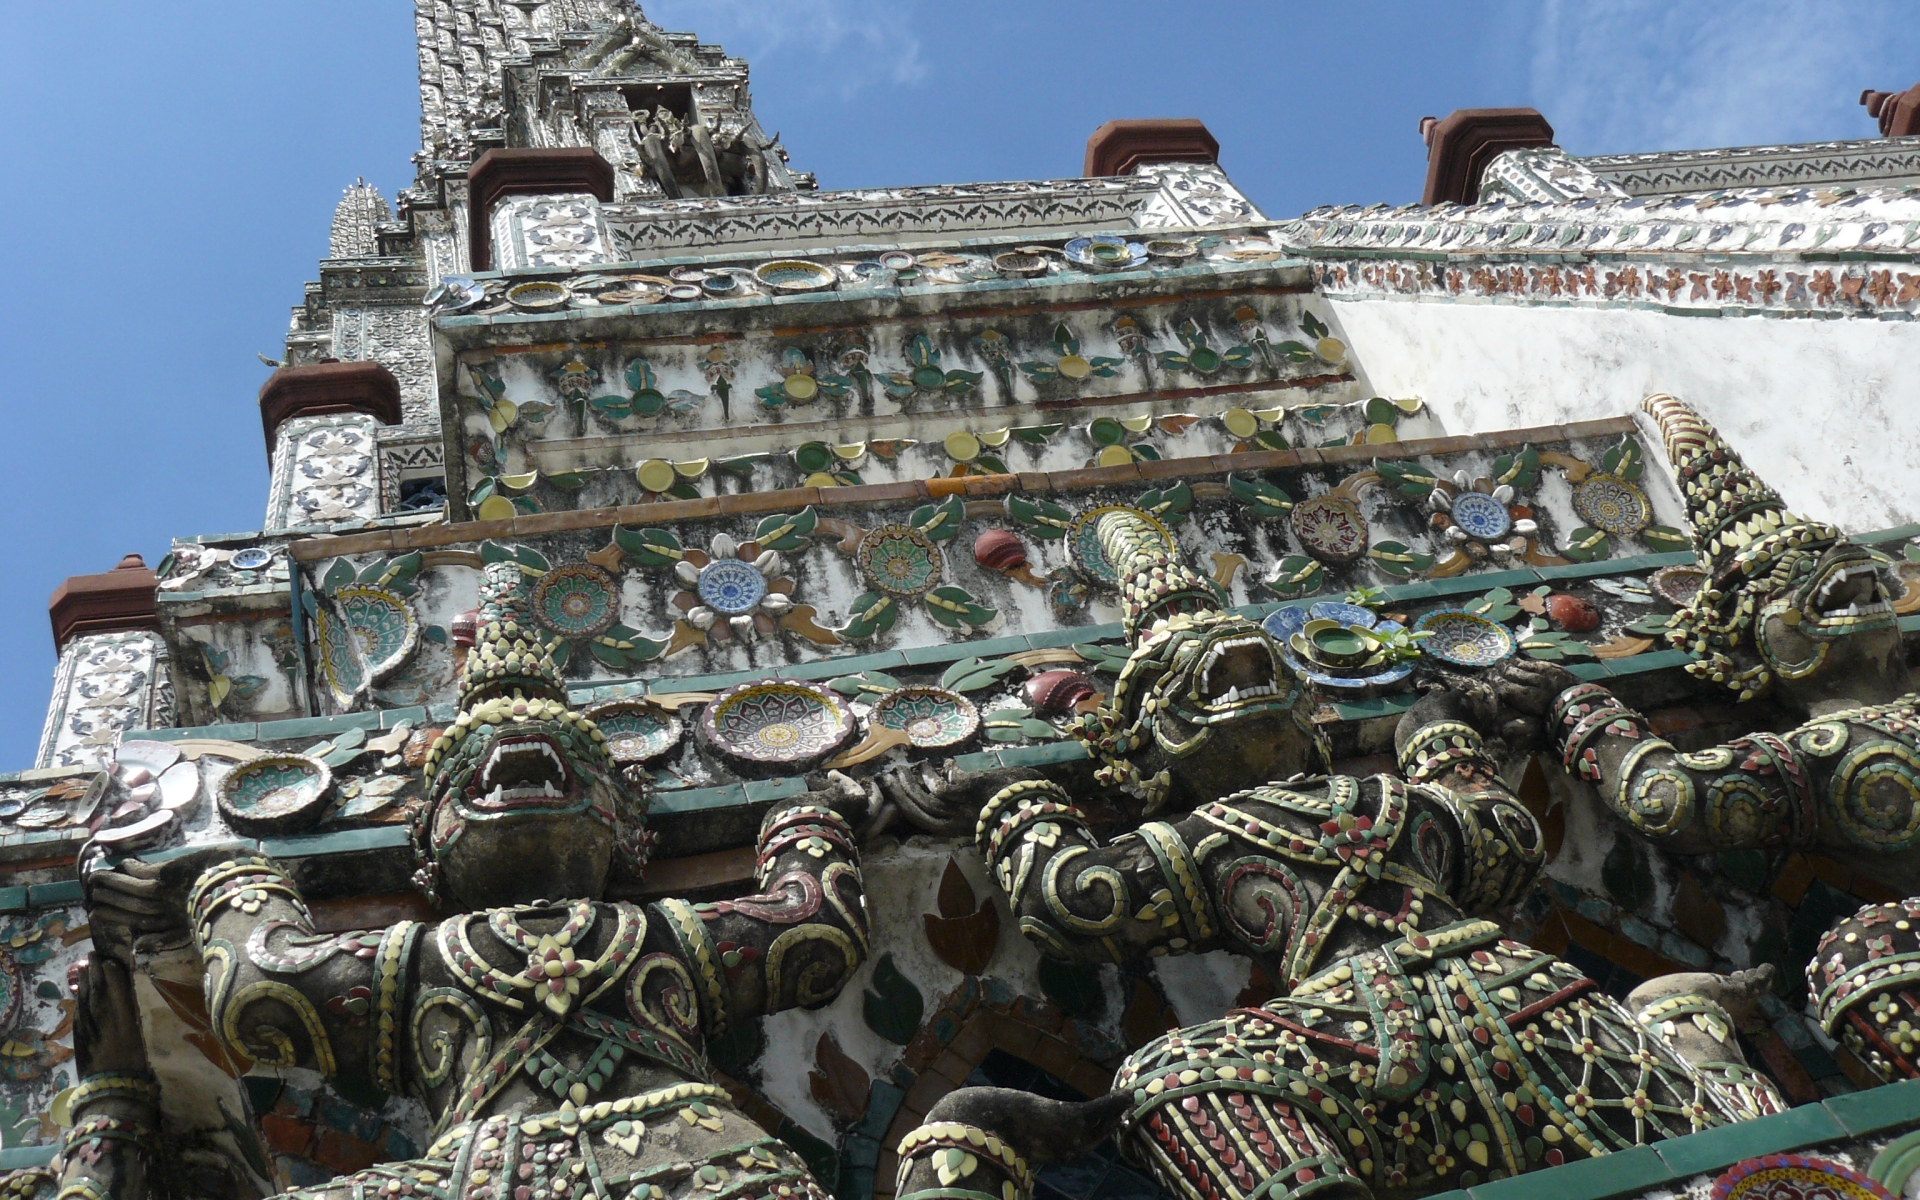 religious, wat arun temple, temples wallpaper for mobile